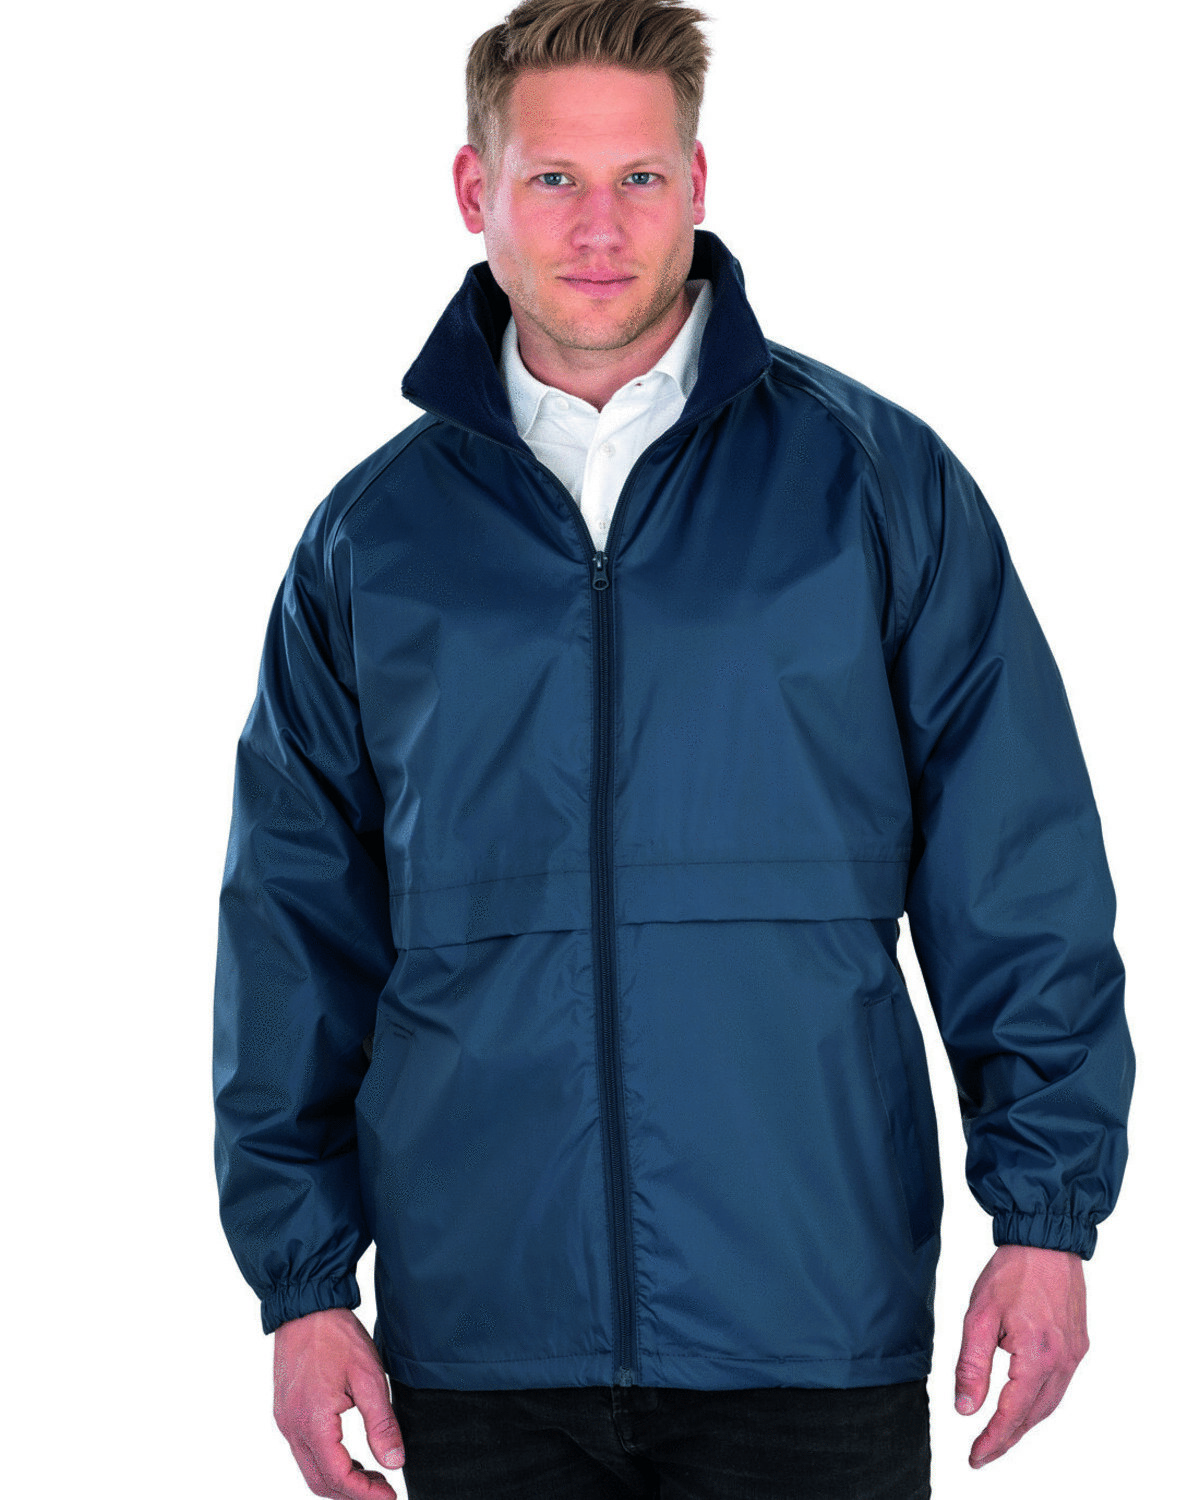 RS203M-CORE MICROFLEECE LINED JACKET